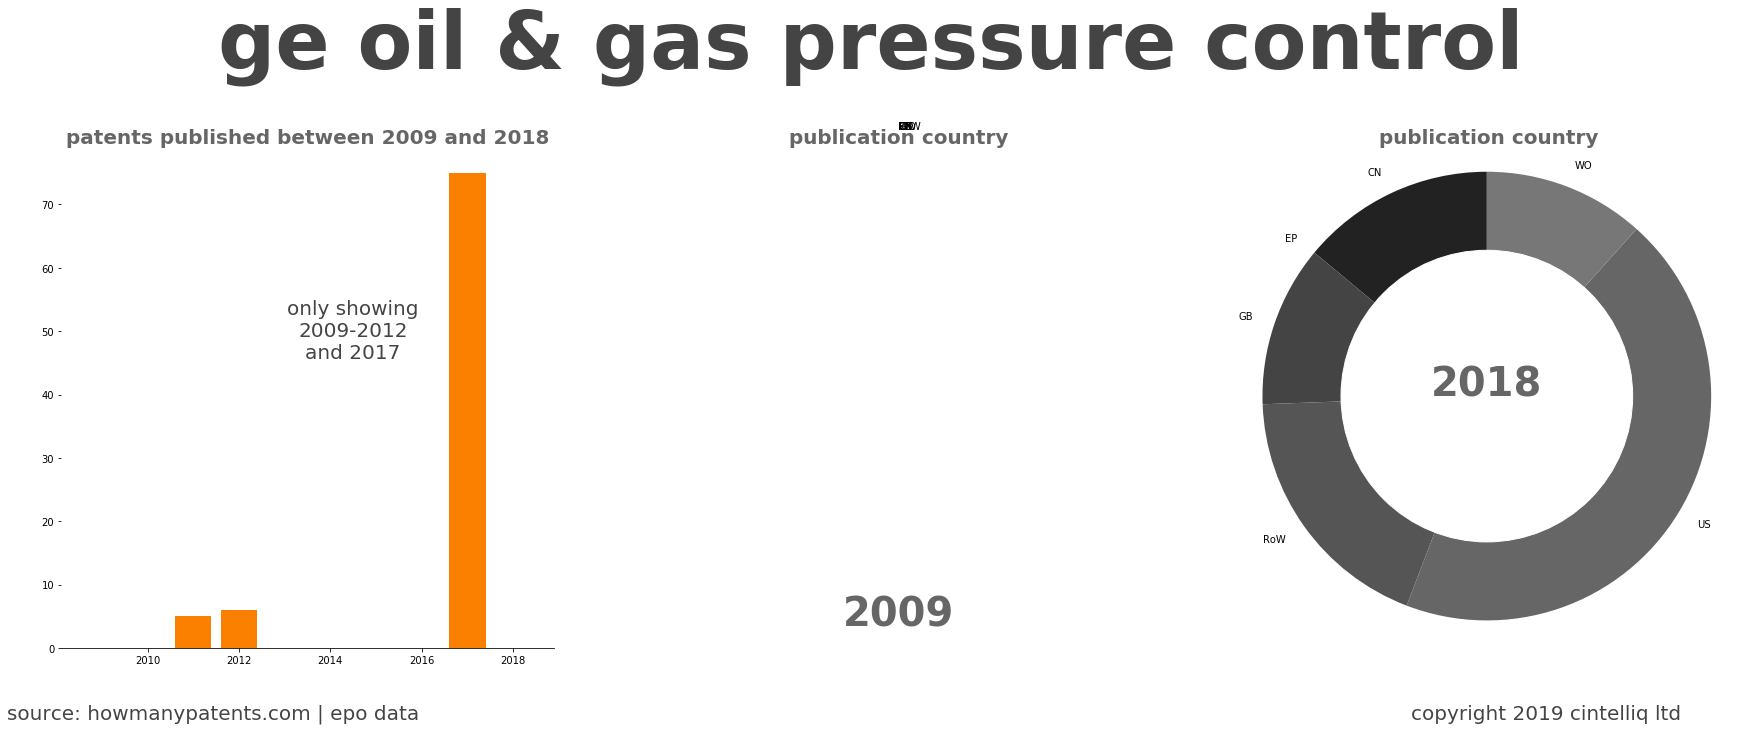 summary of patents for Ge Oil & Gas Pressure Control